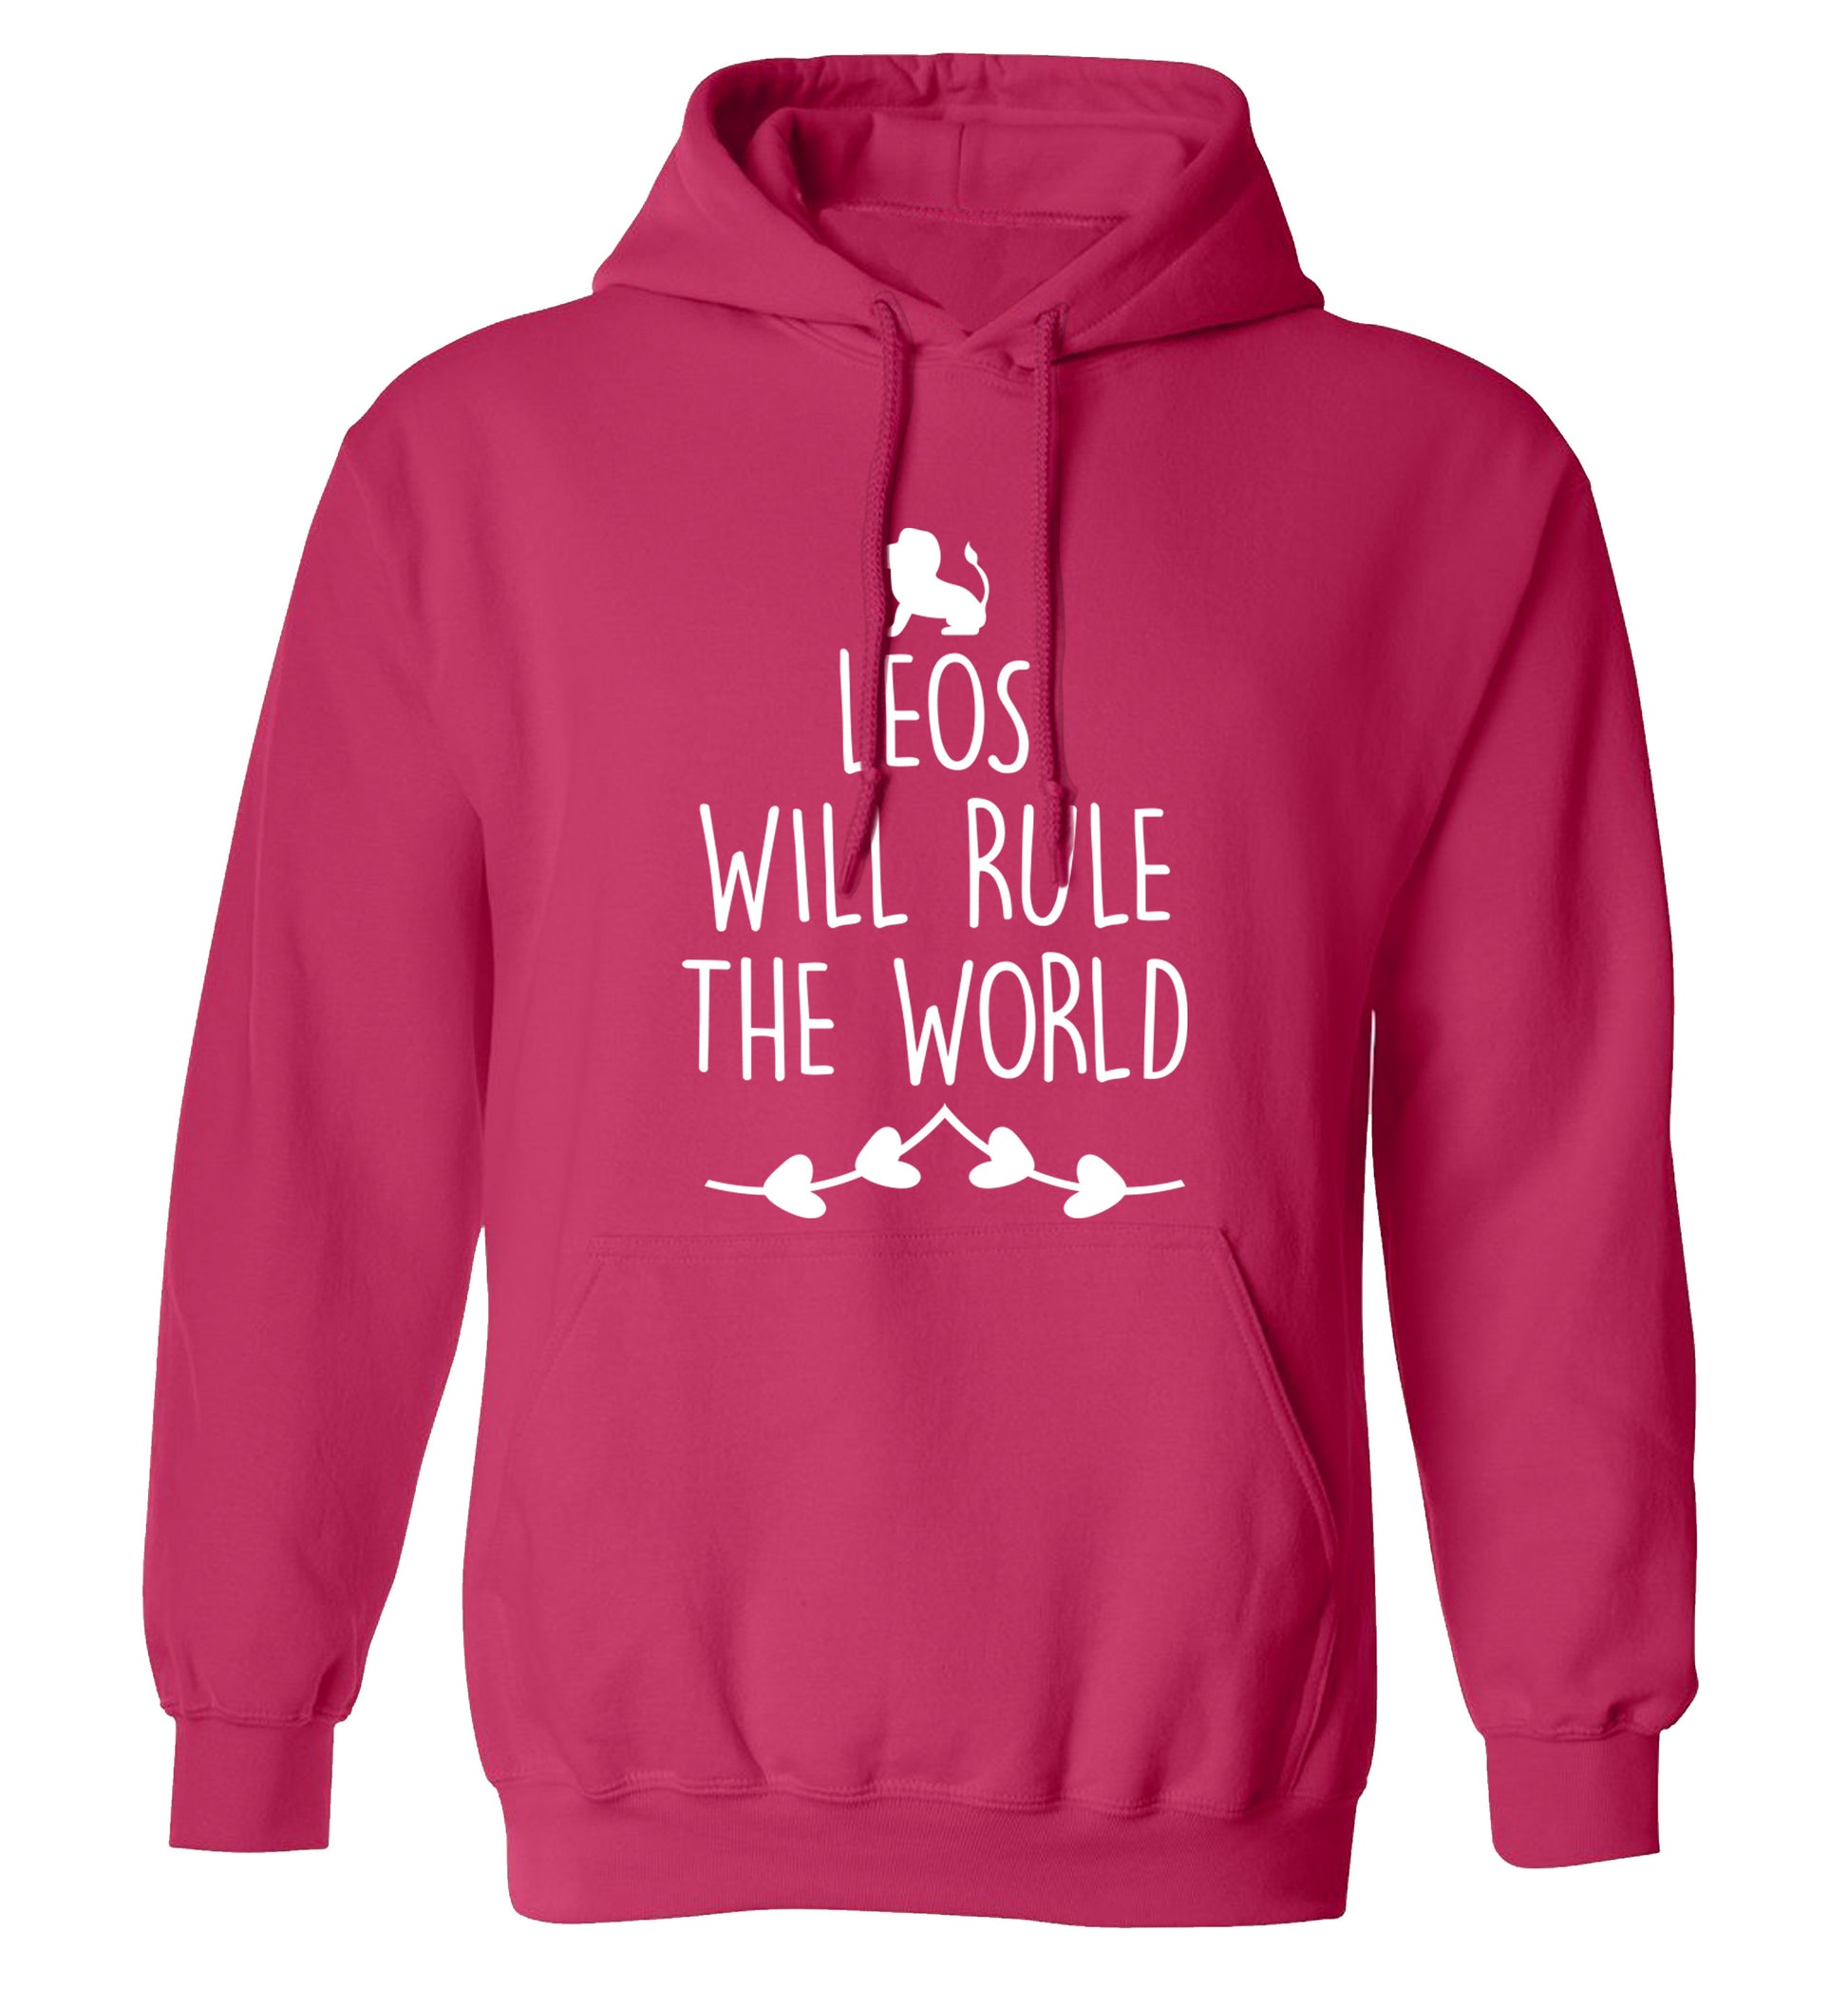 Leos will run the world adults unisex pink hoodie 2XL